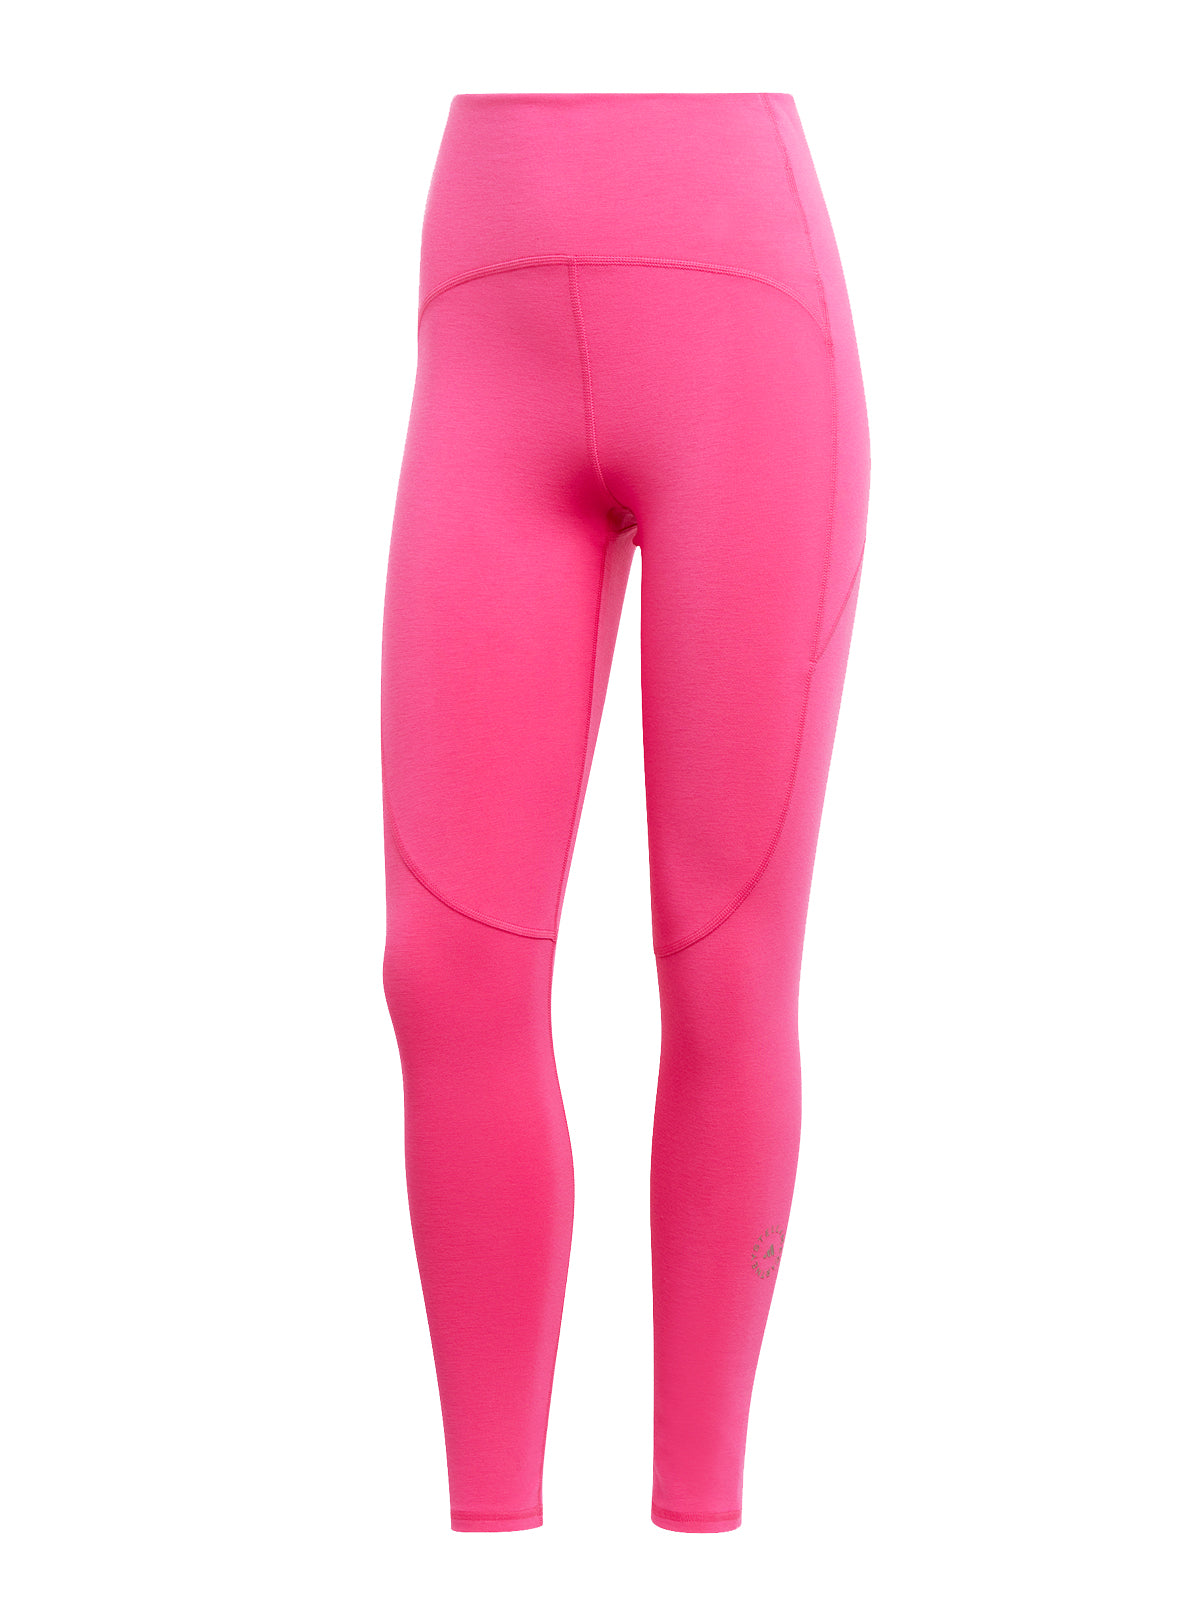 Magenta Women High Waist Yoga Tights, Skin Fit at Rs 300 in Kovilpatti